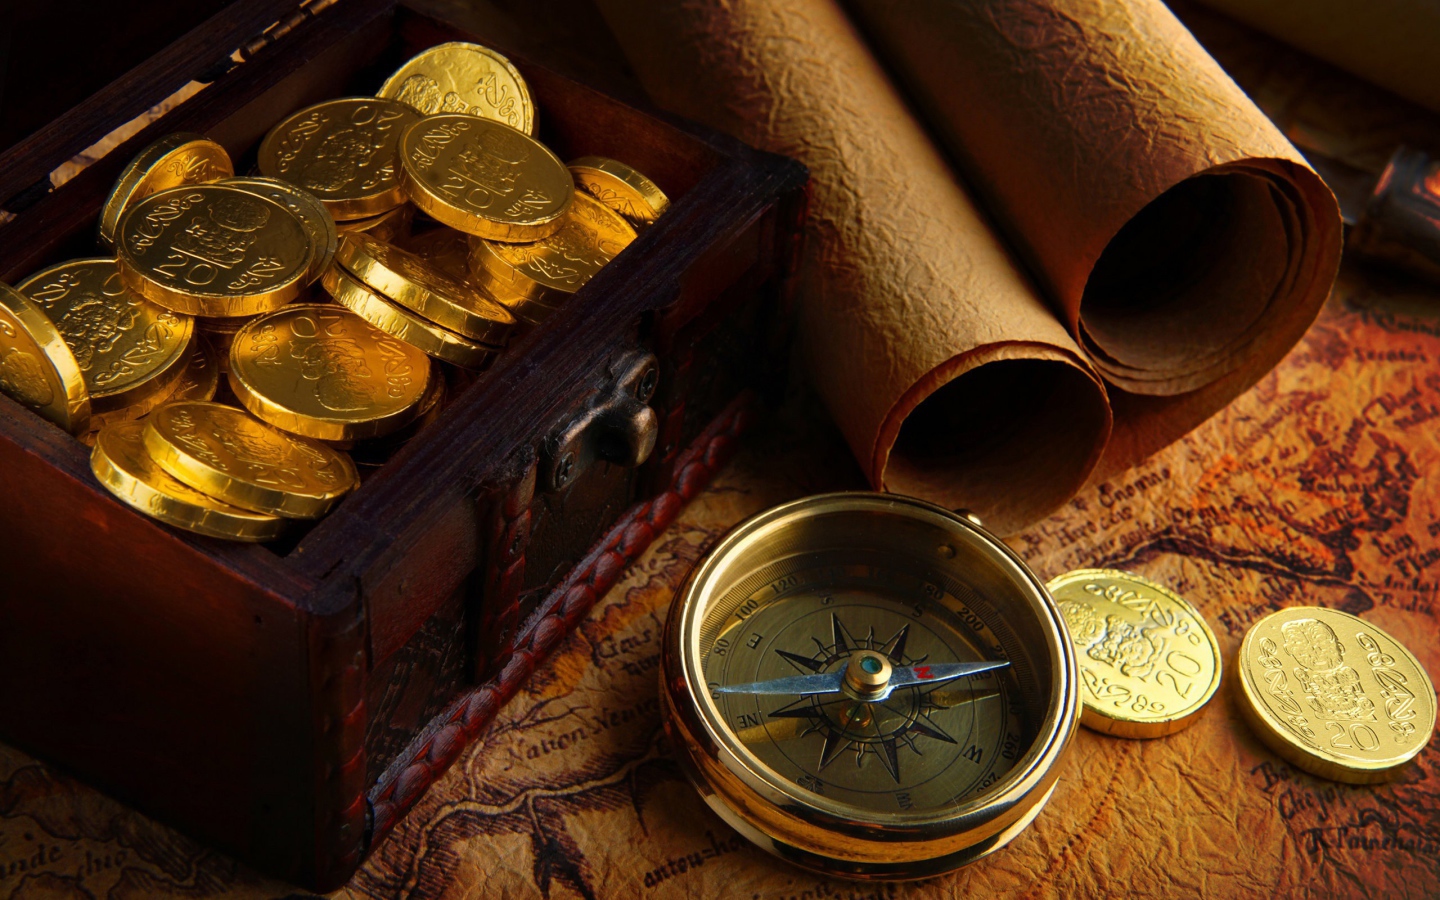 Gold coins in a box